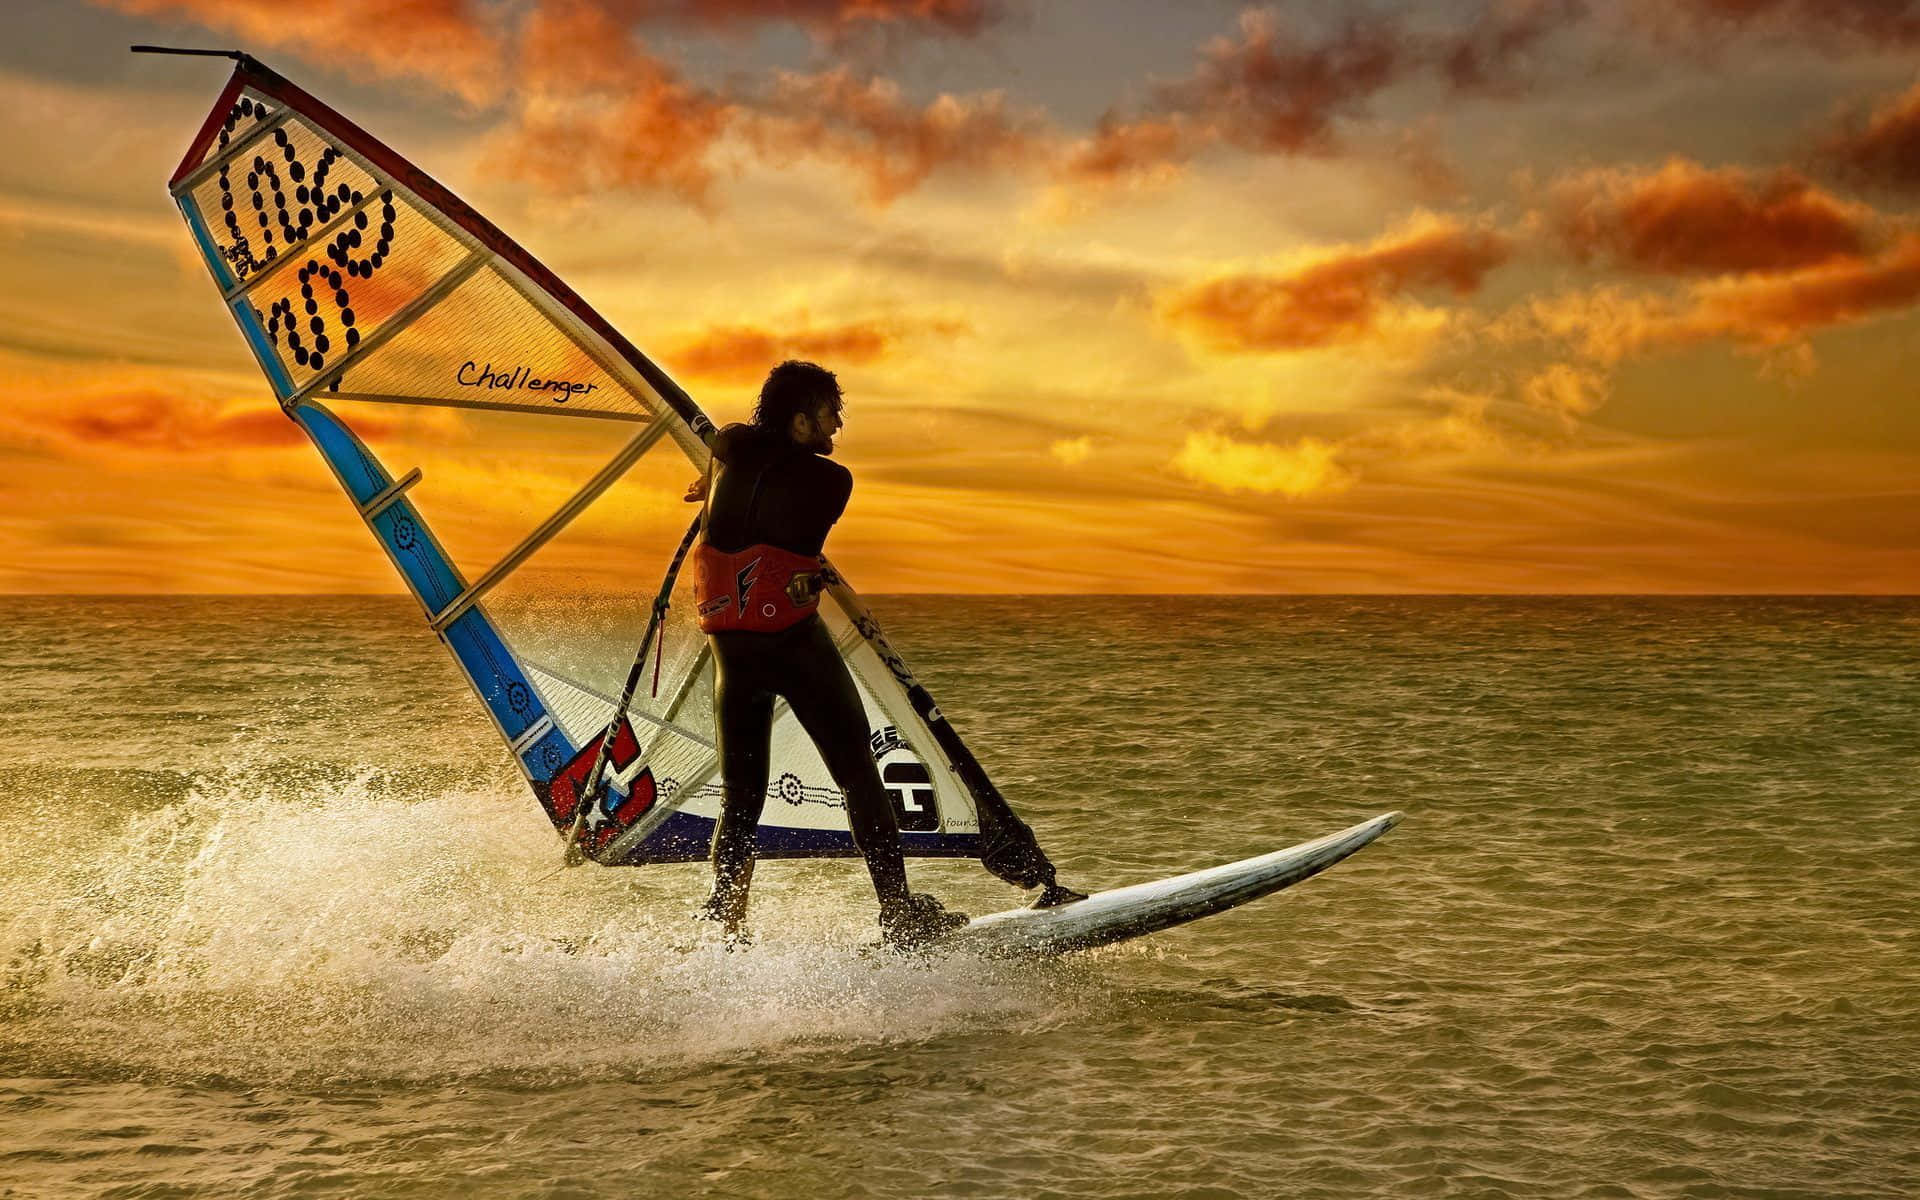 Exciting Beach Water Sports Awaits! Wallpaper